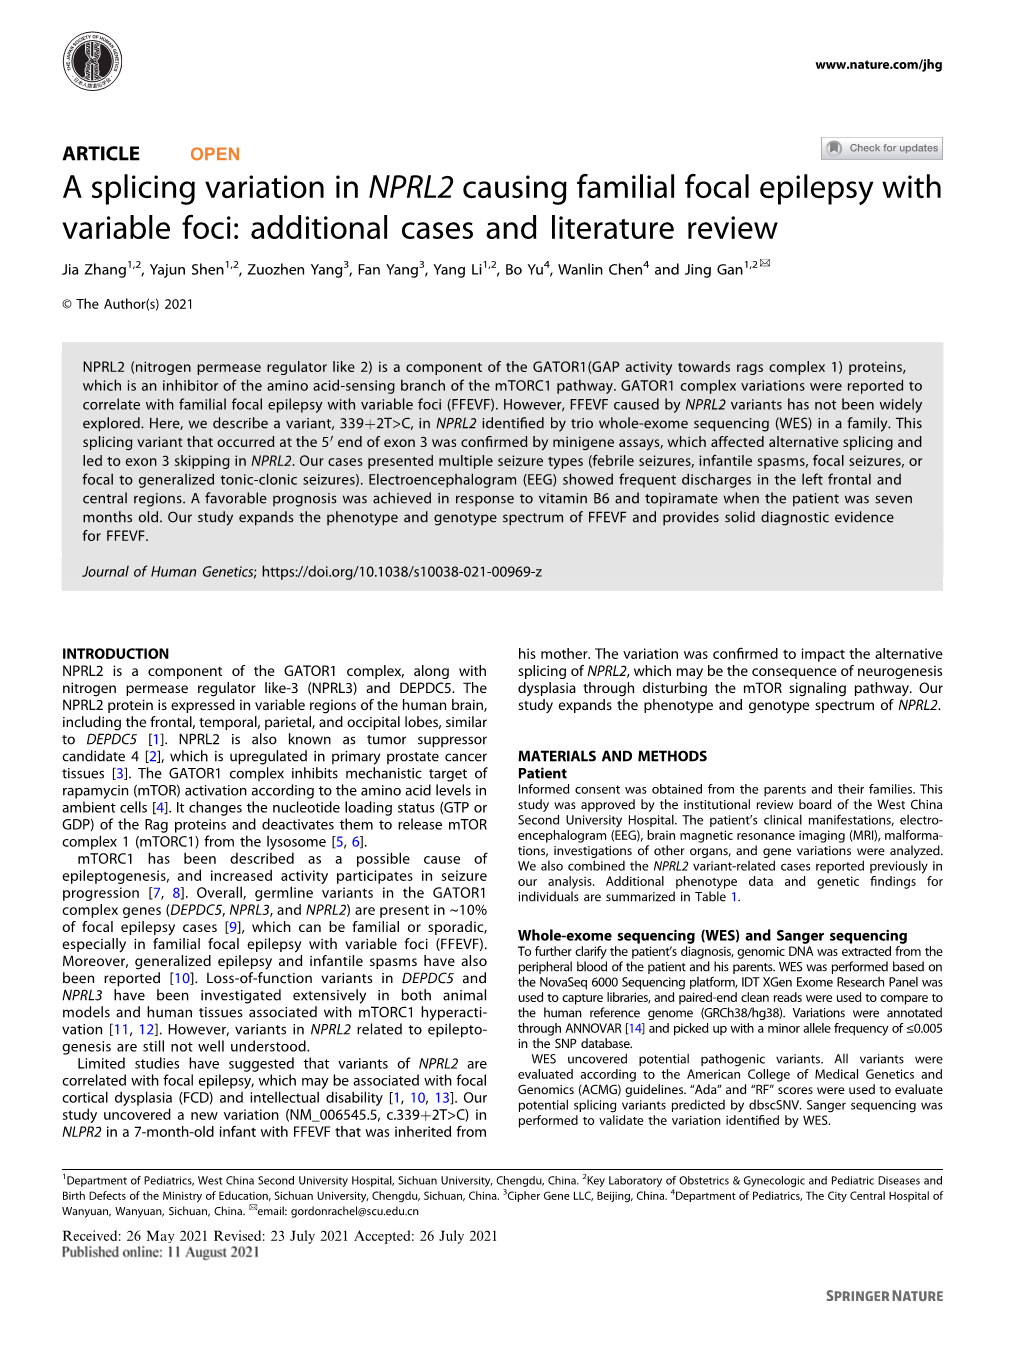 A Splicing Variation in NPRL2 Causing Familial Focal Epilepsy With